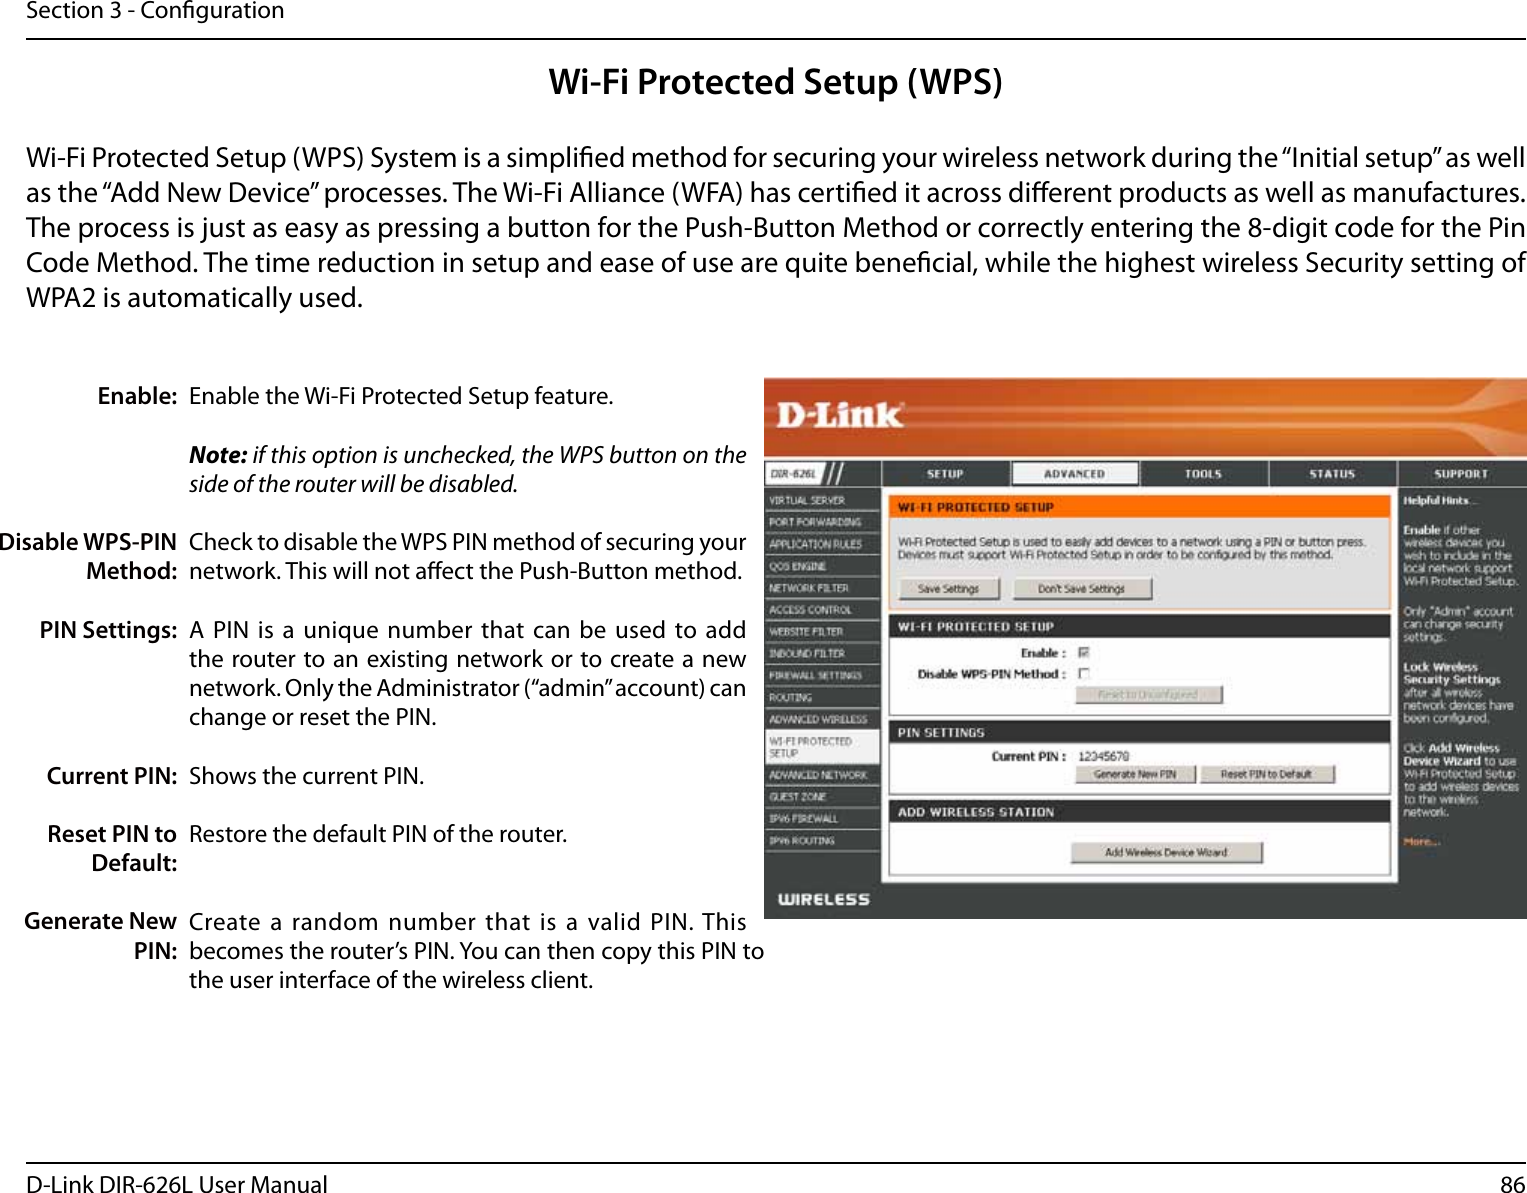 86D-Link DIR-626L User ManualSection 3 - CongurationWi-Fi Protected Setup (WPS)Enable the Wi-Fi Protected Setup feature. Note: if this option is unchecked, the WPS button on the side of the router will be disabled.Check to disable the WPS PIN method of securing your network. This will not aect the Push-Button method.A PIN  is a unique  number that can  be used to  add the router to an existing network or to create a new network. Only the Administrator (“admin” account) can change or reset the PIN. Shows the current PIN. Restore the default PIN of the router. Create a random number that  is a valid  PIN. This becomes the router’s PIN. You can then copy this PIN to the user interface of the wireless client.Enable:Disable WPS-PIN Method:PIN Settings:Current PIN:Reset PIN to Default:Generate New PIN:Wi-Fi Protected Setup (WPS) System is a simplied method for securing your wireless network during the “Initial setup” as well as the “Add New Device” processes. The Wi-Fi Alliance (WFA) has certied it across dierent products as well as manufactures. The process is just as easy as pressing a button for the Push-Button Method or correctly entering the 8-digit code for the Pin Code Method. The time reduction in setup and ease of use are quite benecial, while the highest wireless Security setting of WPA2 is automatically used.